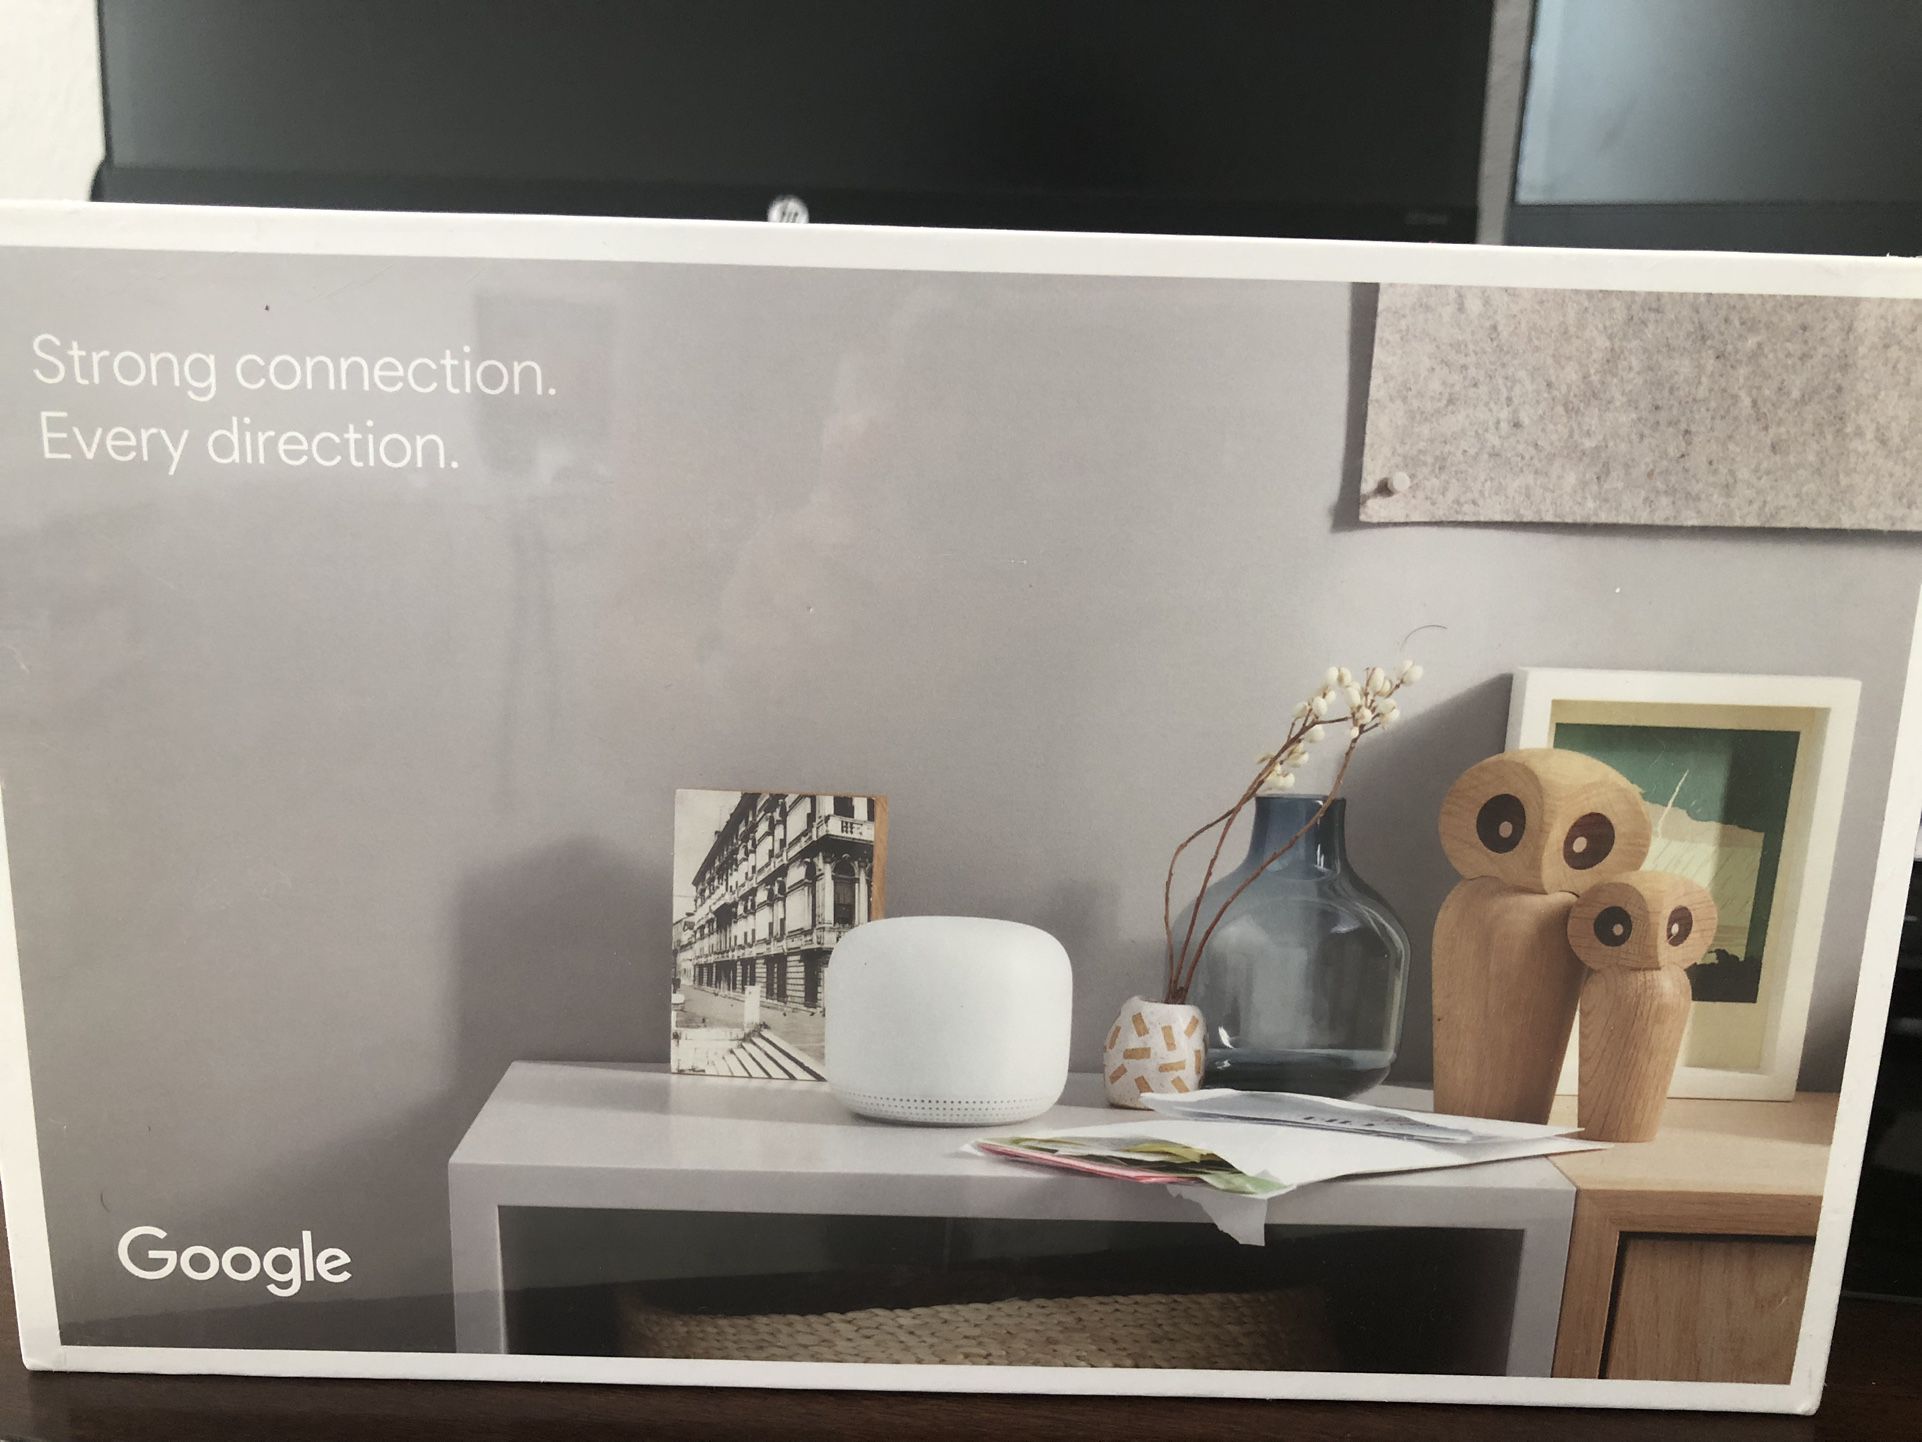 NEW Google Nest Wifi Router And Access Point-Snow